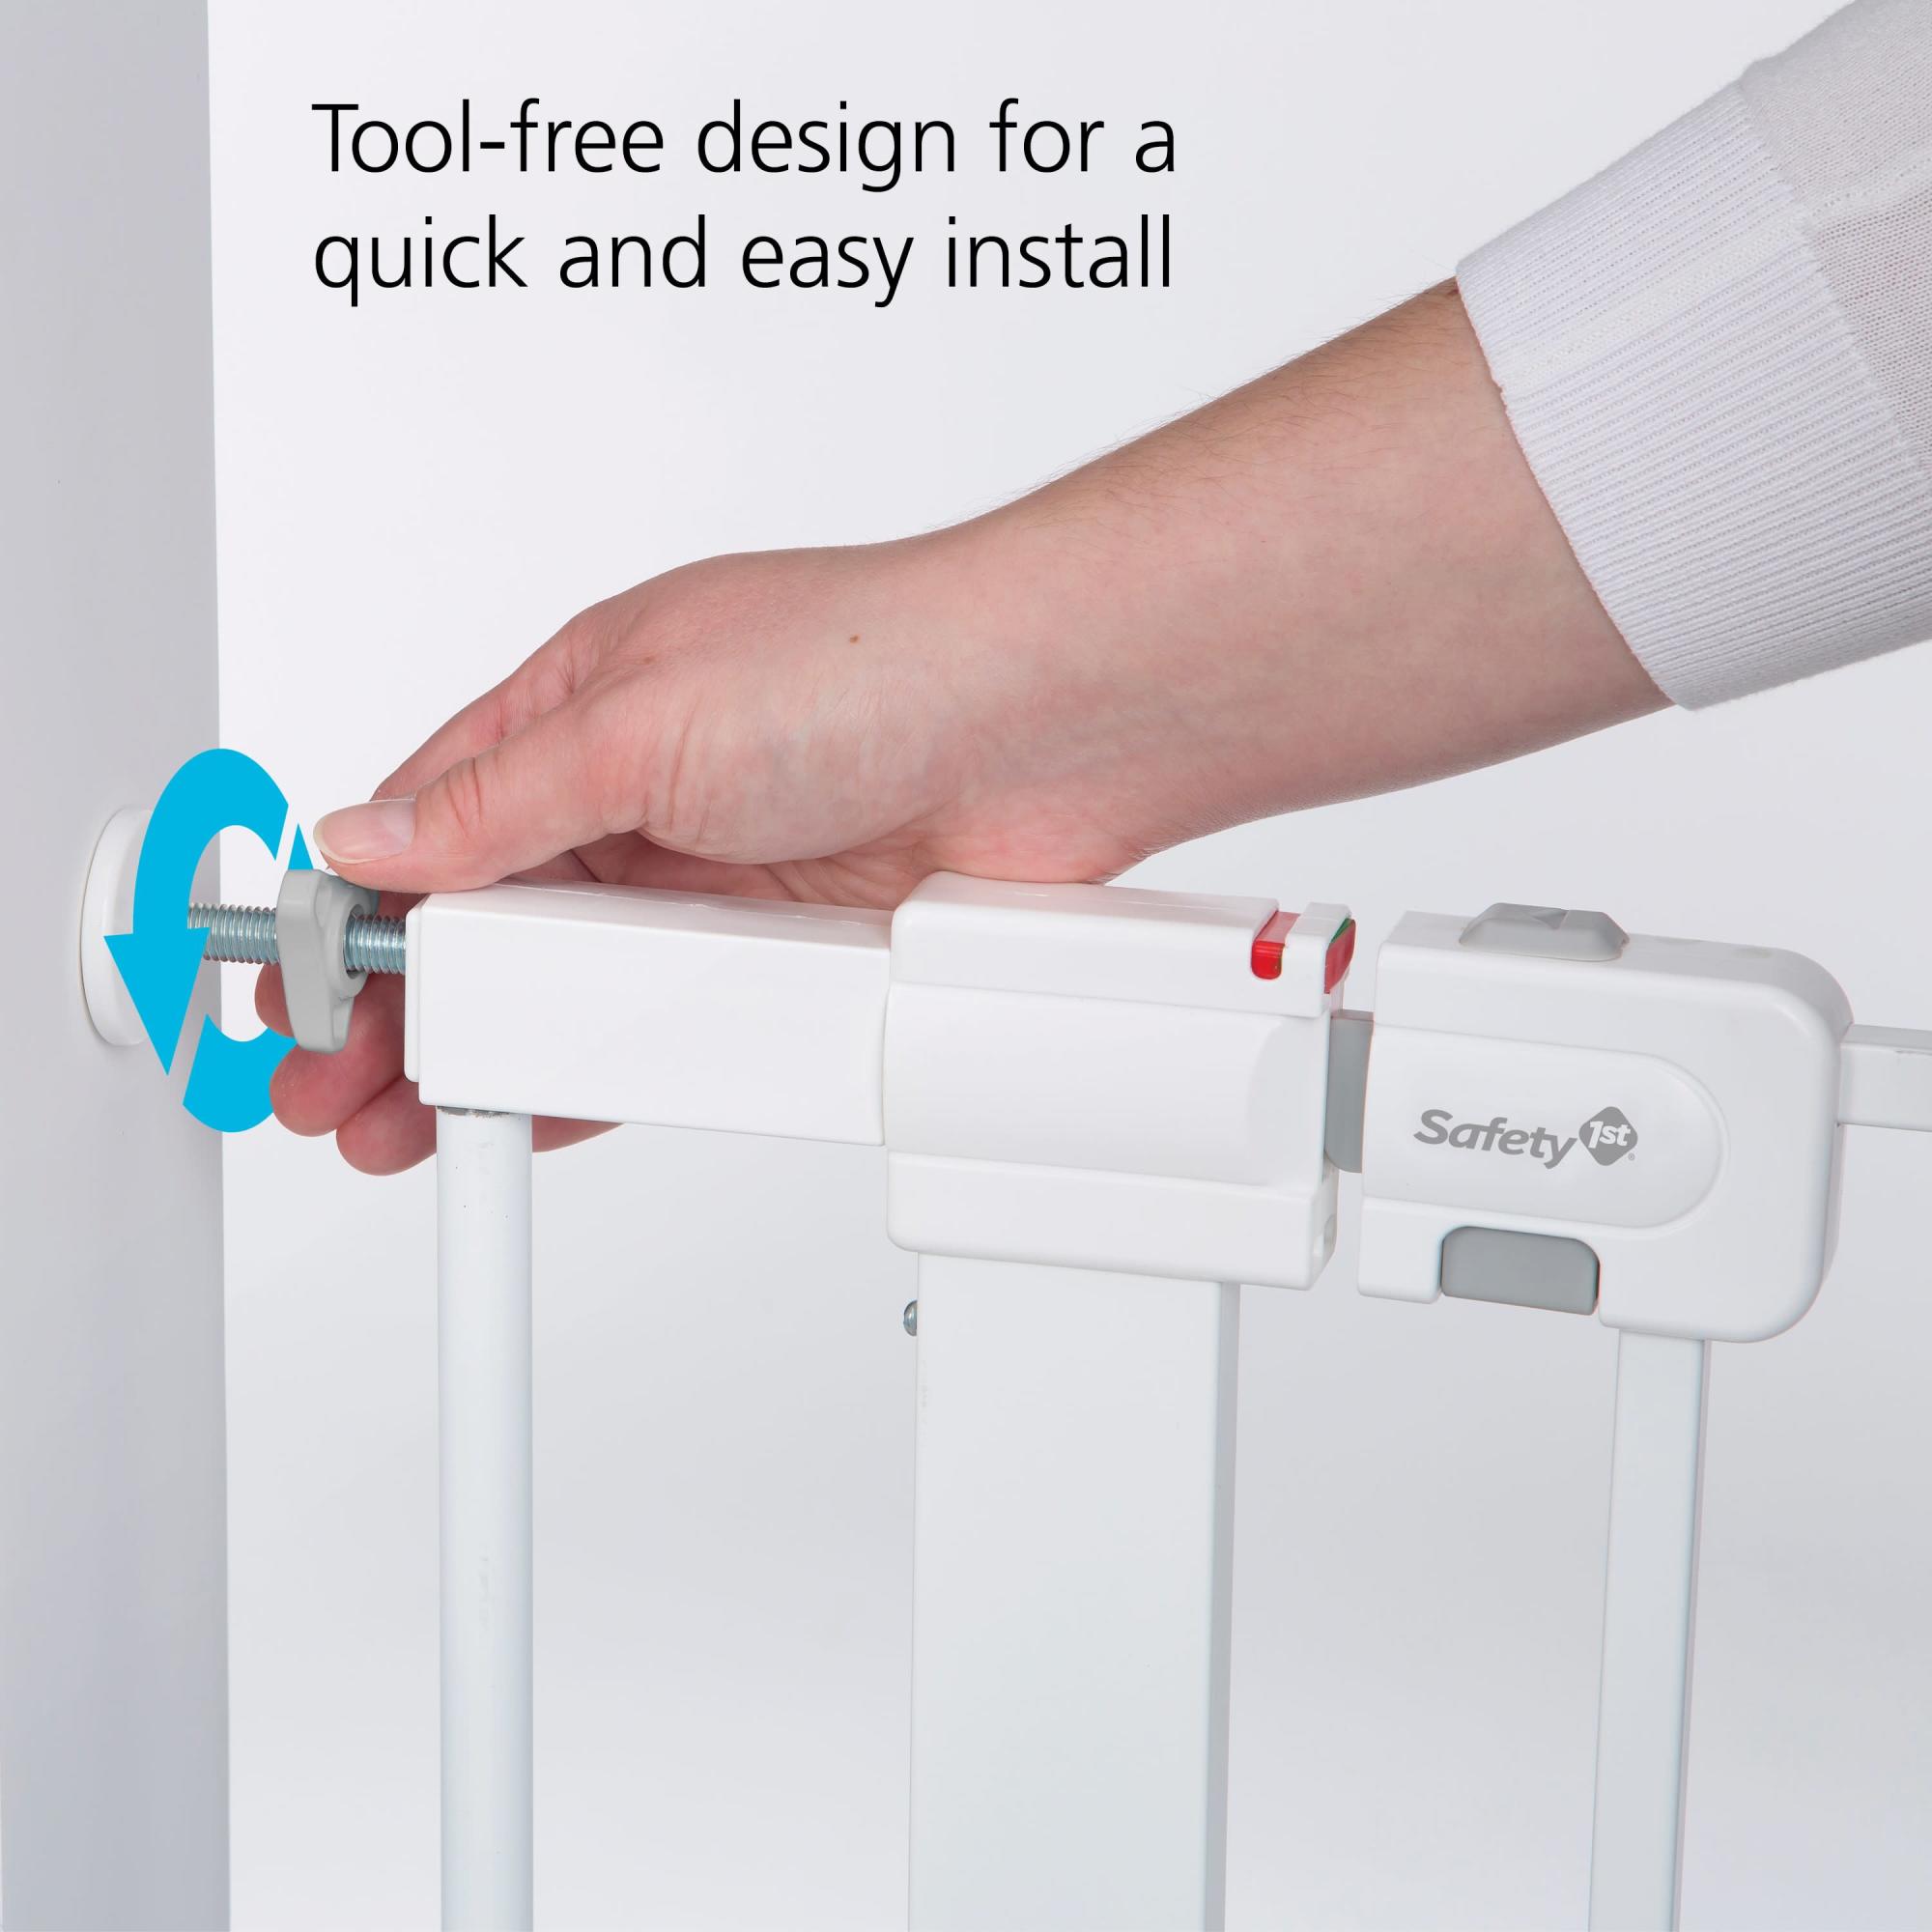 Tool-free design for a quick and easy install